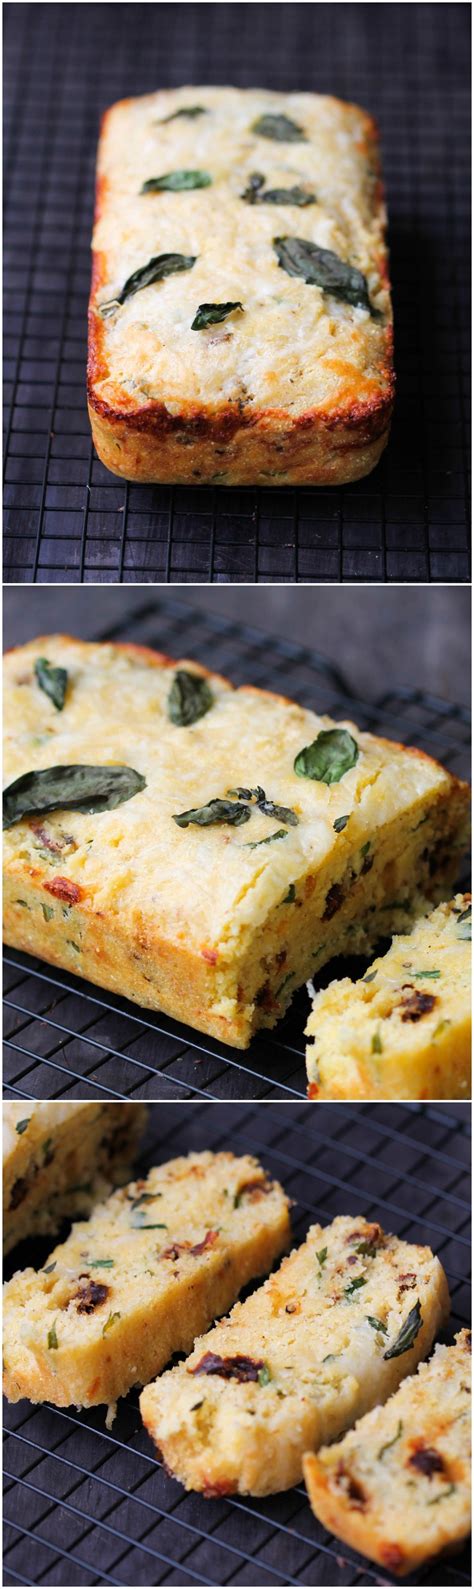 The perfect creamy southern corn mush (and i mean that in the best way) is often a calling card for cooks. Cooking Corn Bread With Corn Grits - Creamy Cheesy Corn Grits - Katie's Cucina / If you try this ...